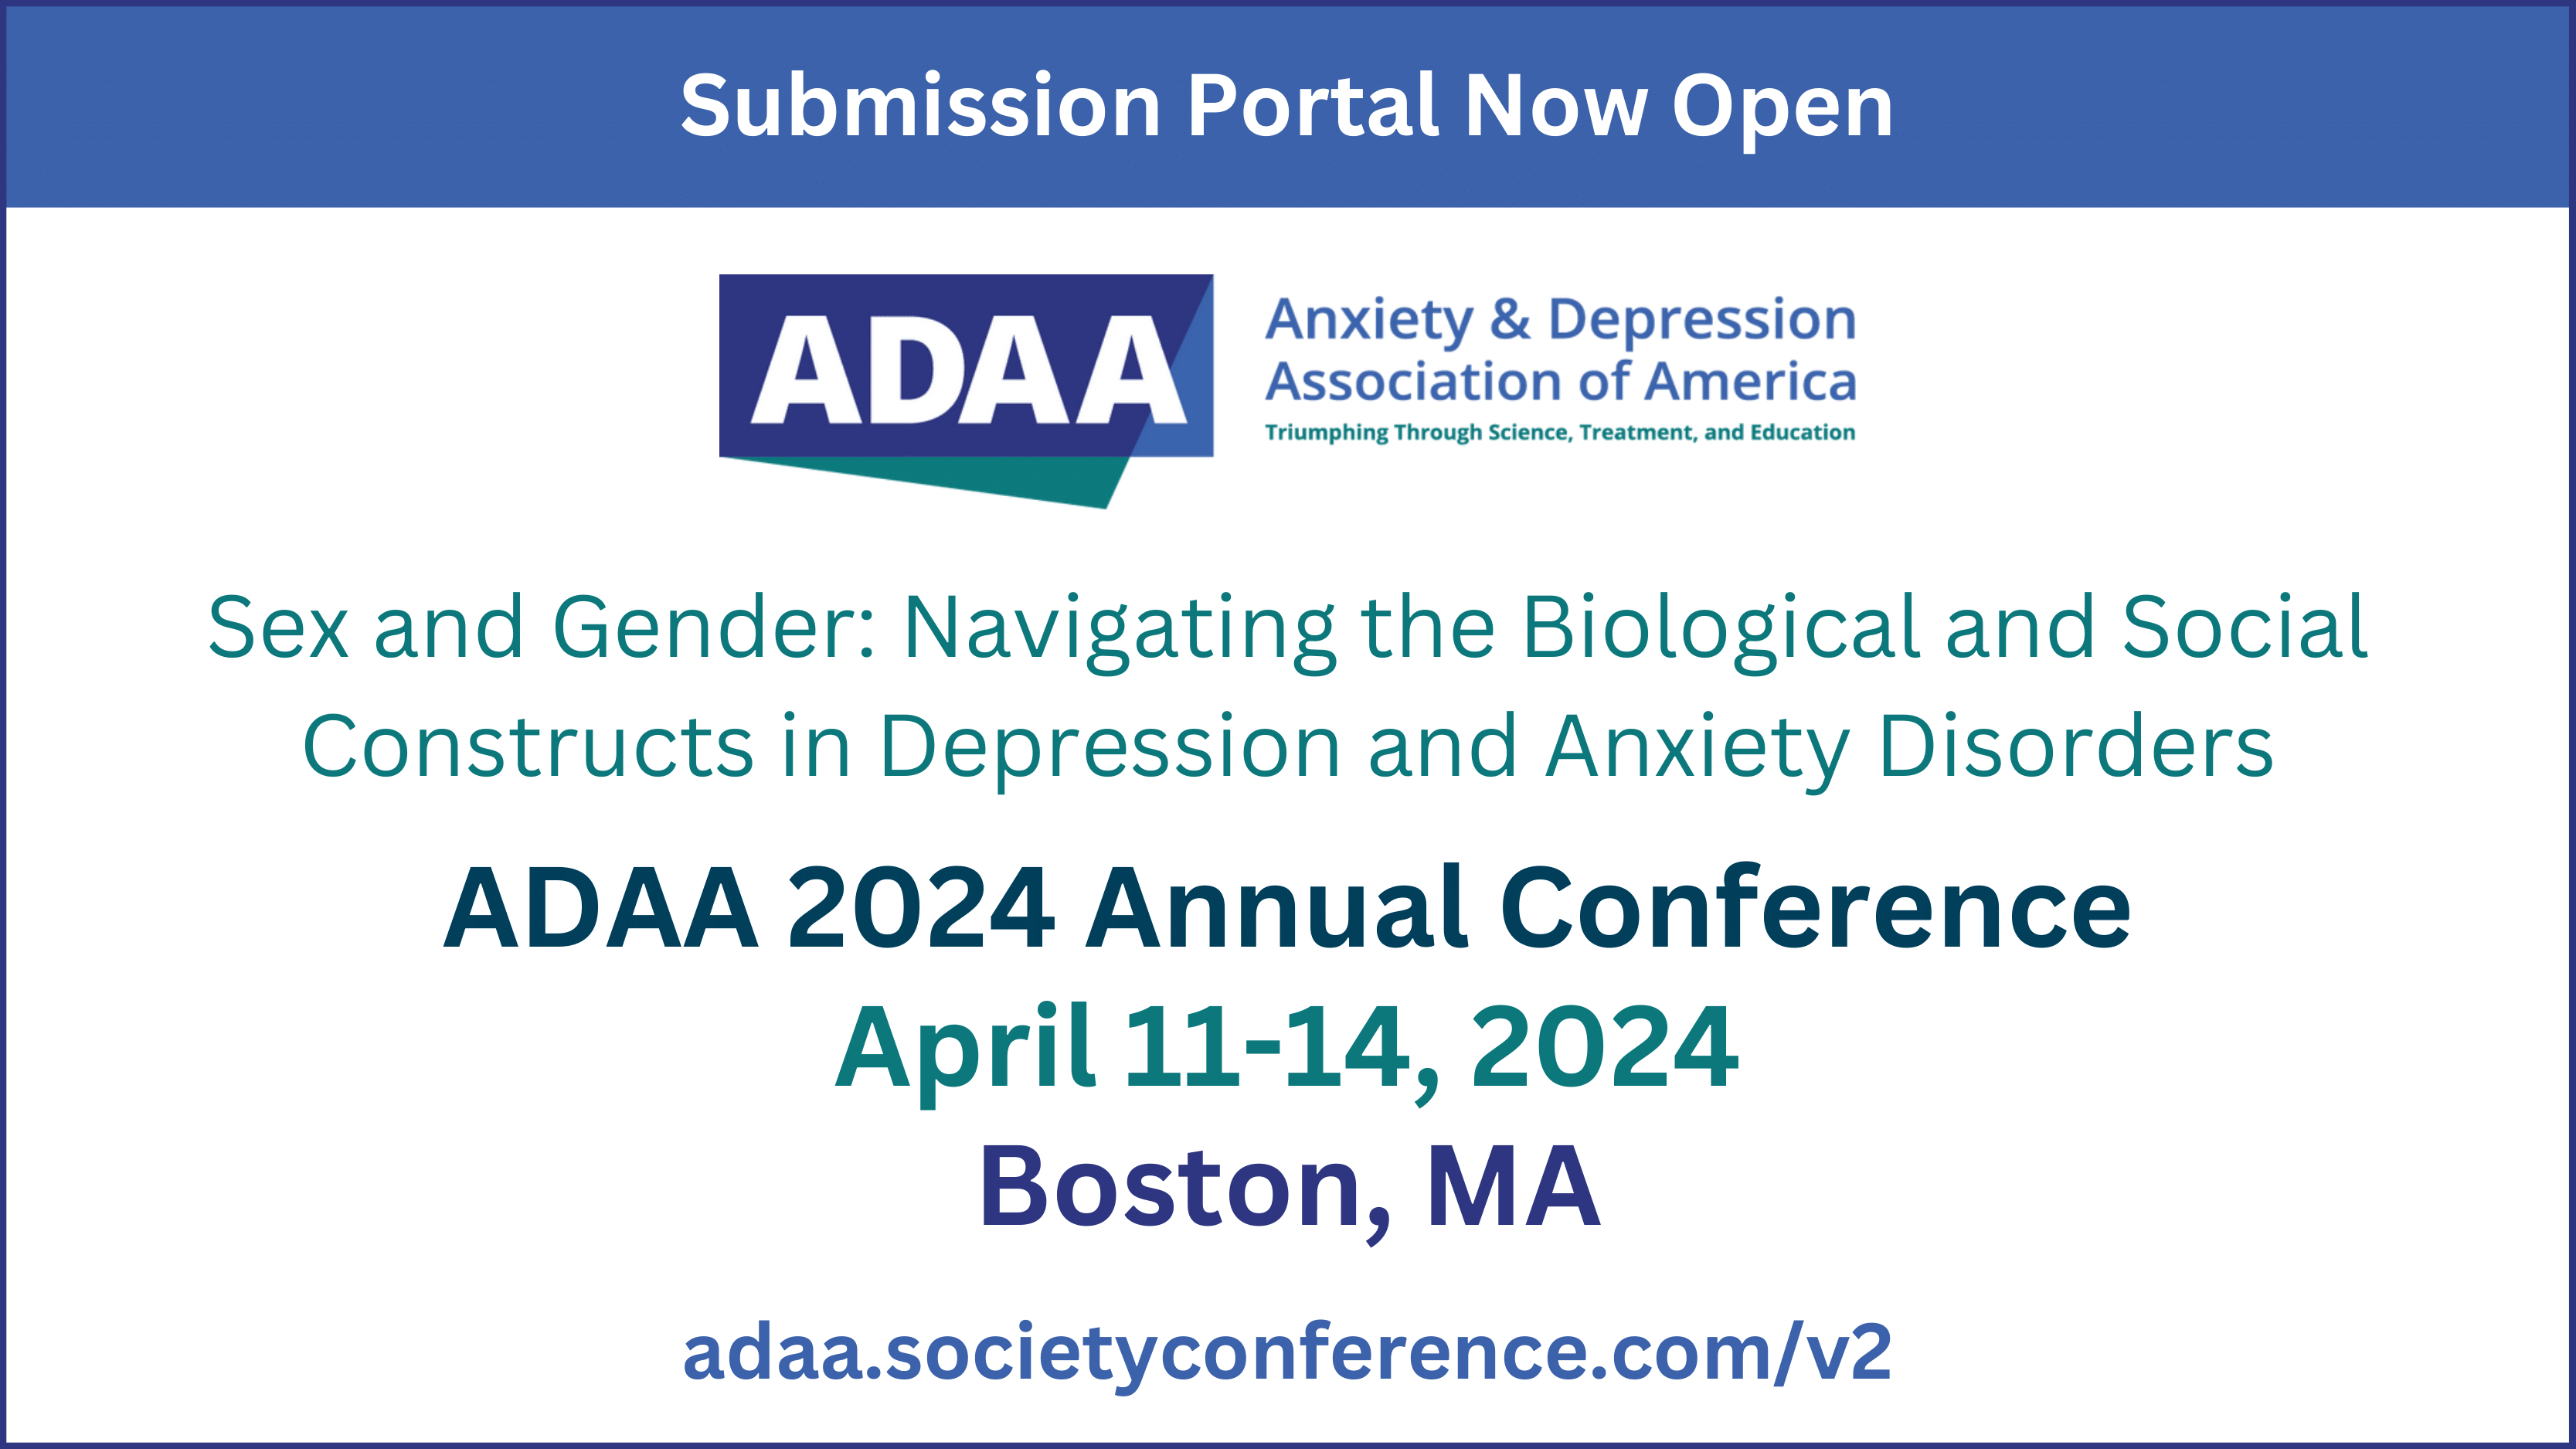 Understanding Group Therapy and Support Groups  Anxiety and Depression  Association of America, ADAA